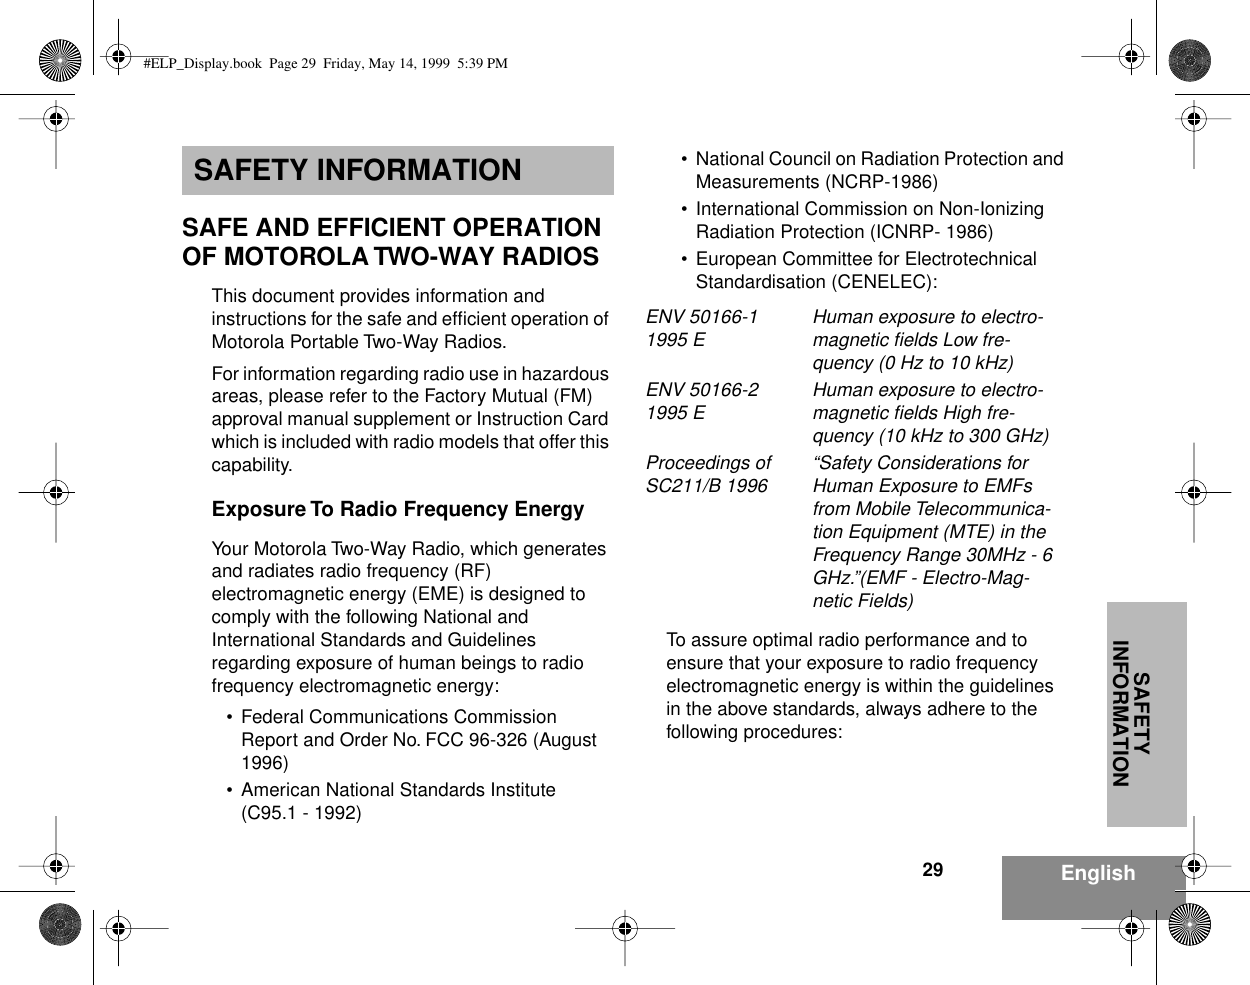 SAFETY INFORMATION29 EnglishSAFETY INFORMATIONSAFE AND EFFICIENT OPERATION OF MOTOROLA TWO-WAY RADIOSThis document provides information and instructions for the safe and efﬁcient operation of Motorola Portable Two-Way Radios.For information regarding radio use in hazardous areas, please refer to the Factory Mutual (FM) approval manual supplement or Instruction Card which is included with radio models that offer this capability.Exposure To Radio Frequency EnergyYour Motorola Two-Way Radio, which generates and radiates radio frequency (RF) electromagnetic energy (EME) is designed to comply with the following National and International Standards and Guidelines regarding exposure of human beings to radio frequency electromagnetic energy:• Federal Communications Commission Report and Order No. FCC 96-326 (August 1996)• American National Standards Institute (C95.1 - 1992)• National Council on Radiation Protection and Measurements (NCRP-1986)• International Commission on Non-Ionizing Radiation Protection (ICNRP- 1986)• European Committee for Electrotechnical Standardisation (CENELEC):To assure optimal radio performance and to ensure that your exposure to radio frequency electromagnetic energy is within the guidelines in the above standards, always adhere to the following procedures:ENV 50166-1 1995 E Human exposure to electro-magnetic ﬁelds Low fre-quency (0 Hz to 10 kHz) ENV 50166-2 1995 E Human exposure to electro-magnetic ﬁelds High fre-quency (10 kHz to 300 GHz)Proceedings of SC211/B 1996 “Safety Considerations for Human Exposure to EMFs from Mobile Telecommunica-tion Equipment (MTE) in the Frequency Range 30MHz - 6 GHz.”(EMF - Electro-Mag-netic Fields)#ELP_Display.book  Page 29  Friday, May 14, 1999  5:39 PM